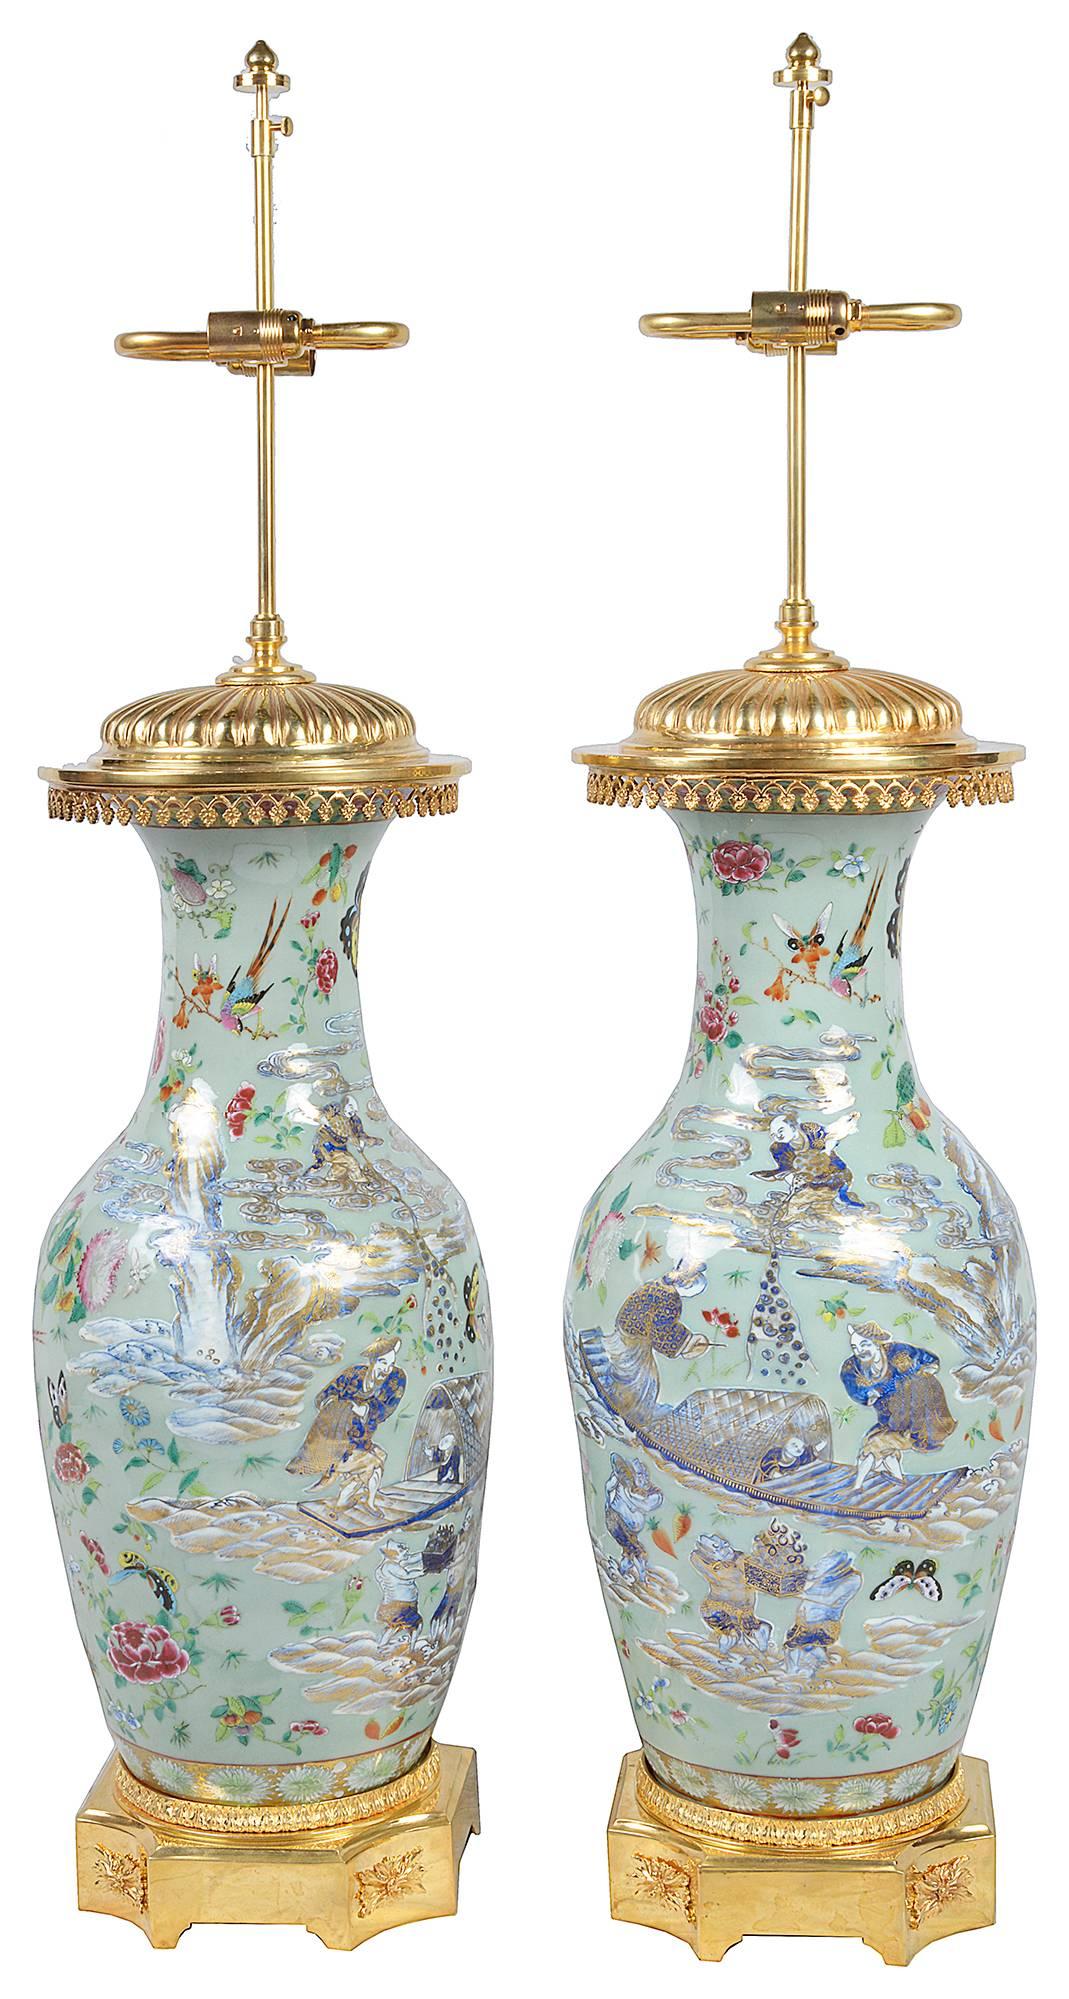 A good quality pair of Chinese 19th century Celedon vase or lamps. Each depicting exotic birds, flowers and foliage. Mounted with gilded ormolu top and base.